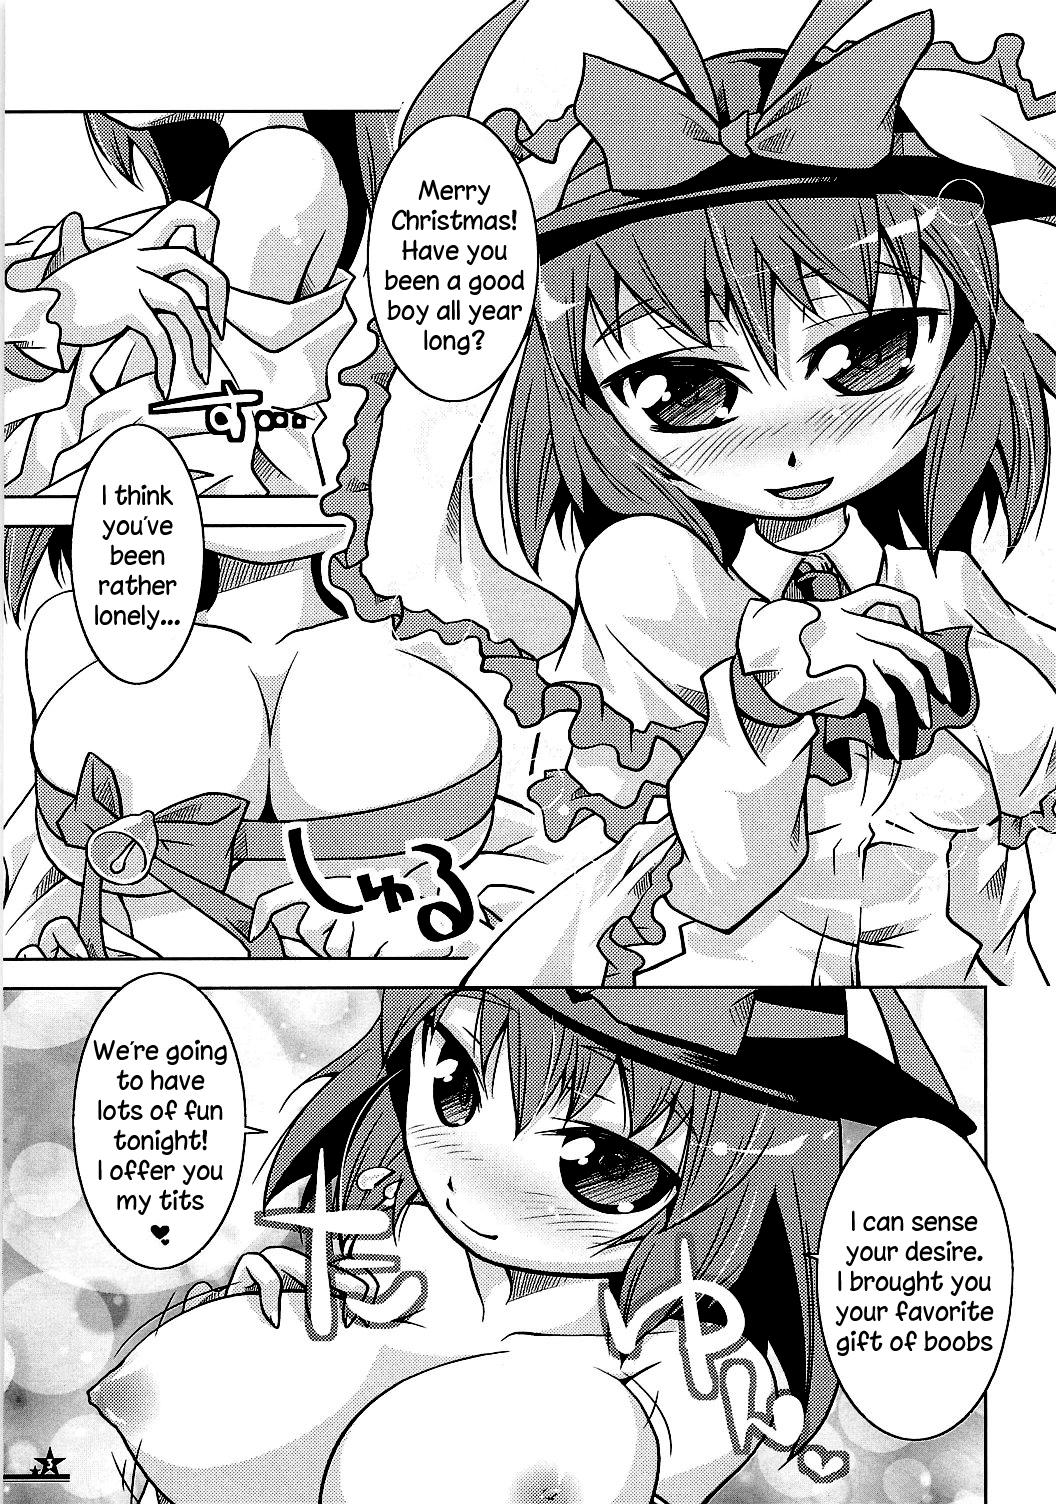 Teen Christmas Night Fever - Touhou project Eating - Page 2